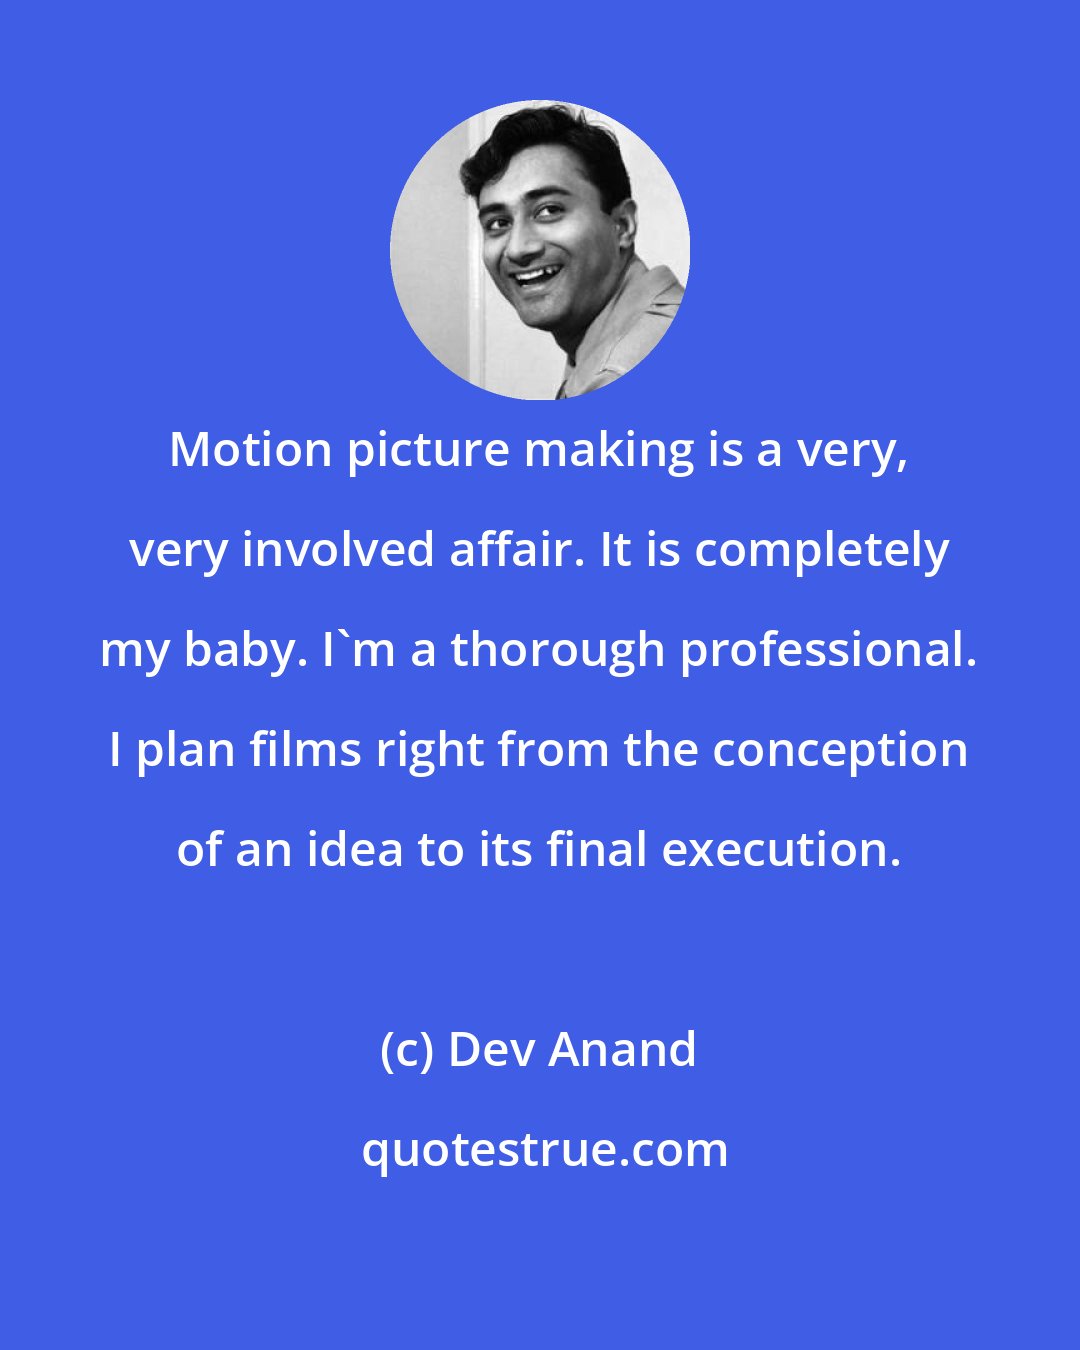 Dev Anand: Motion picture making is a very, very involved affair. It is completely my baby. I'm a thorough professional. I plan films right from the conception of an idea to its final execution.